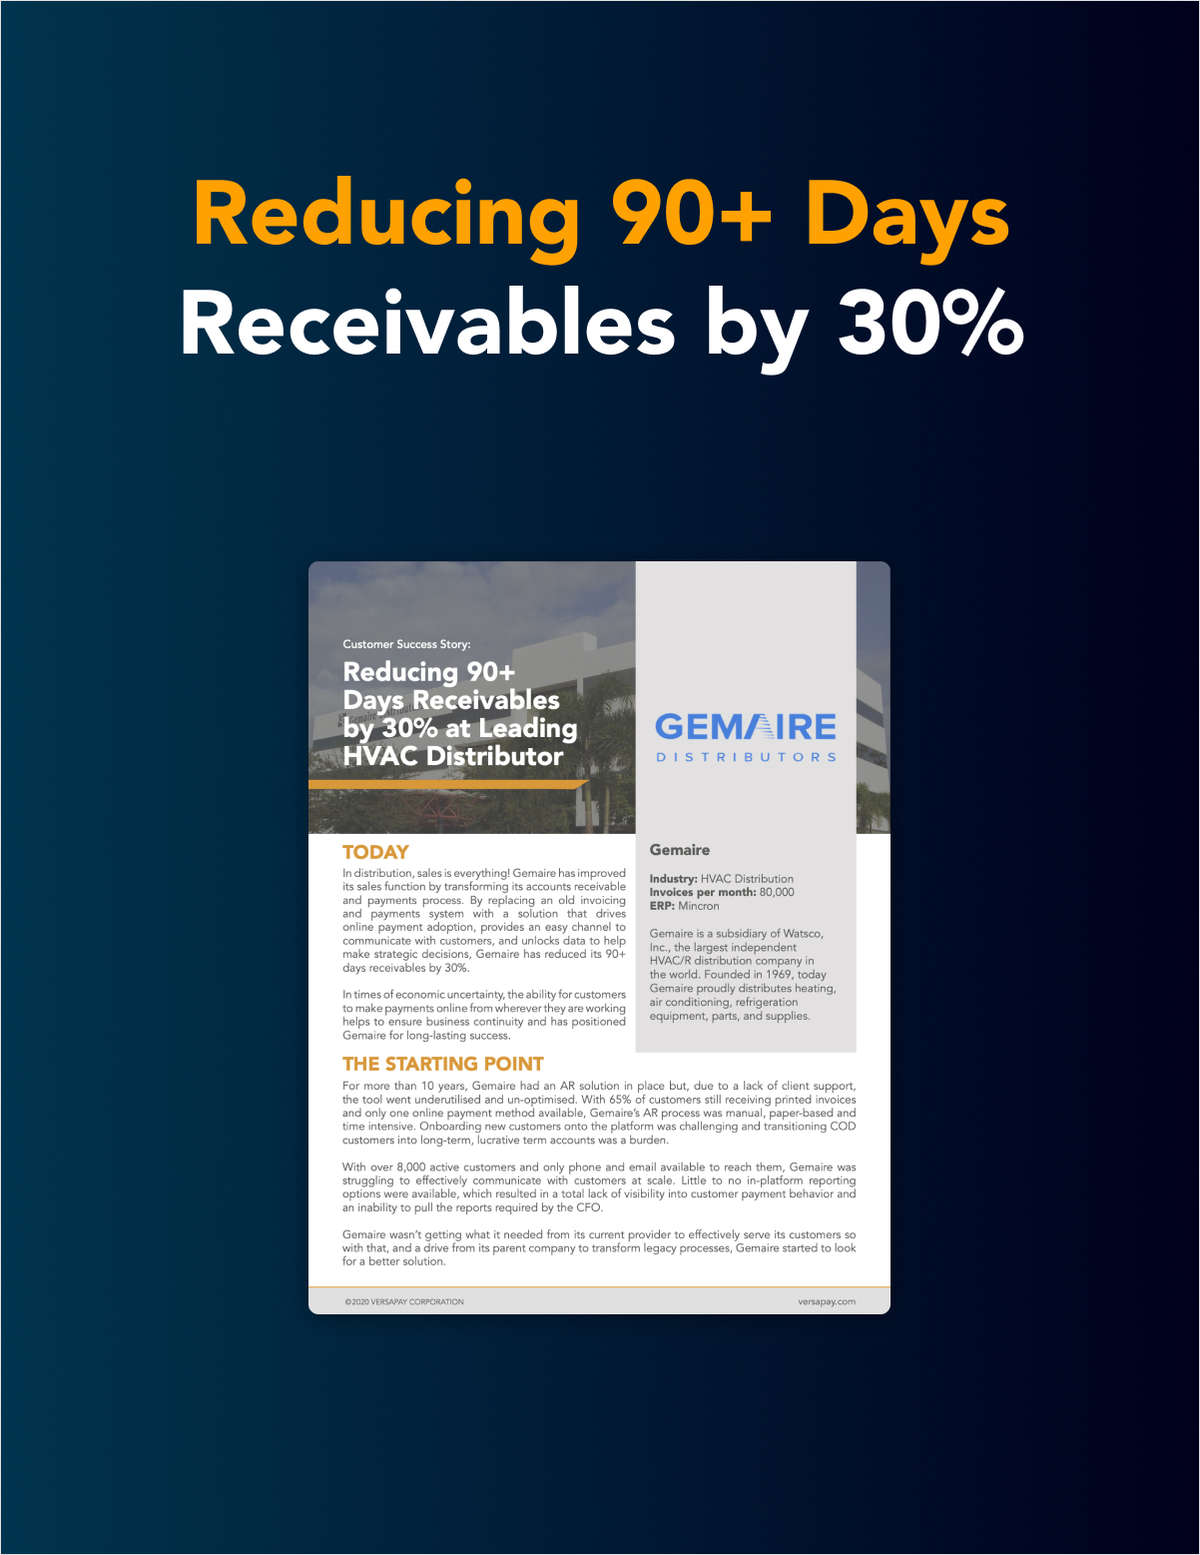 How this HVAC distributor reduced 90+ Days Receivables by 30%